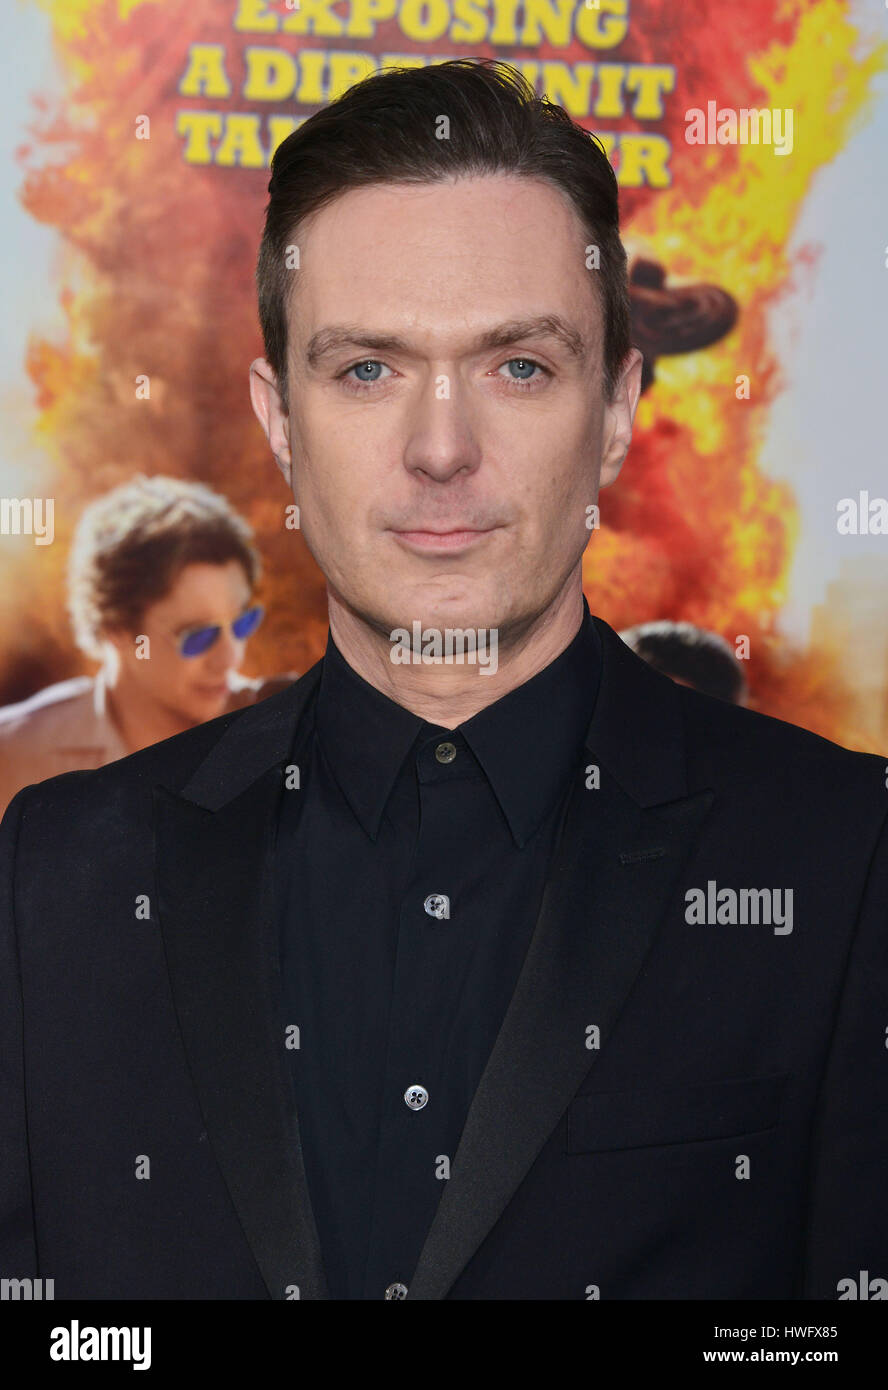 Los Angeles, USA. 20th Mar, 2017. Fil Eisler - Composer arriving at the CHIPS Premiere at the TCL Chinese Theatre in Los Angeles. March 20, 2017. Credit: Tsuni/USA/Alamy Live News Stock Photo